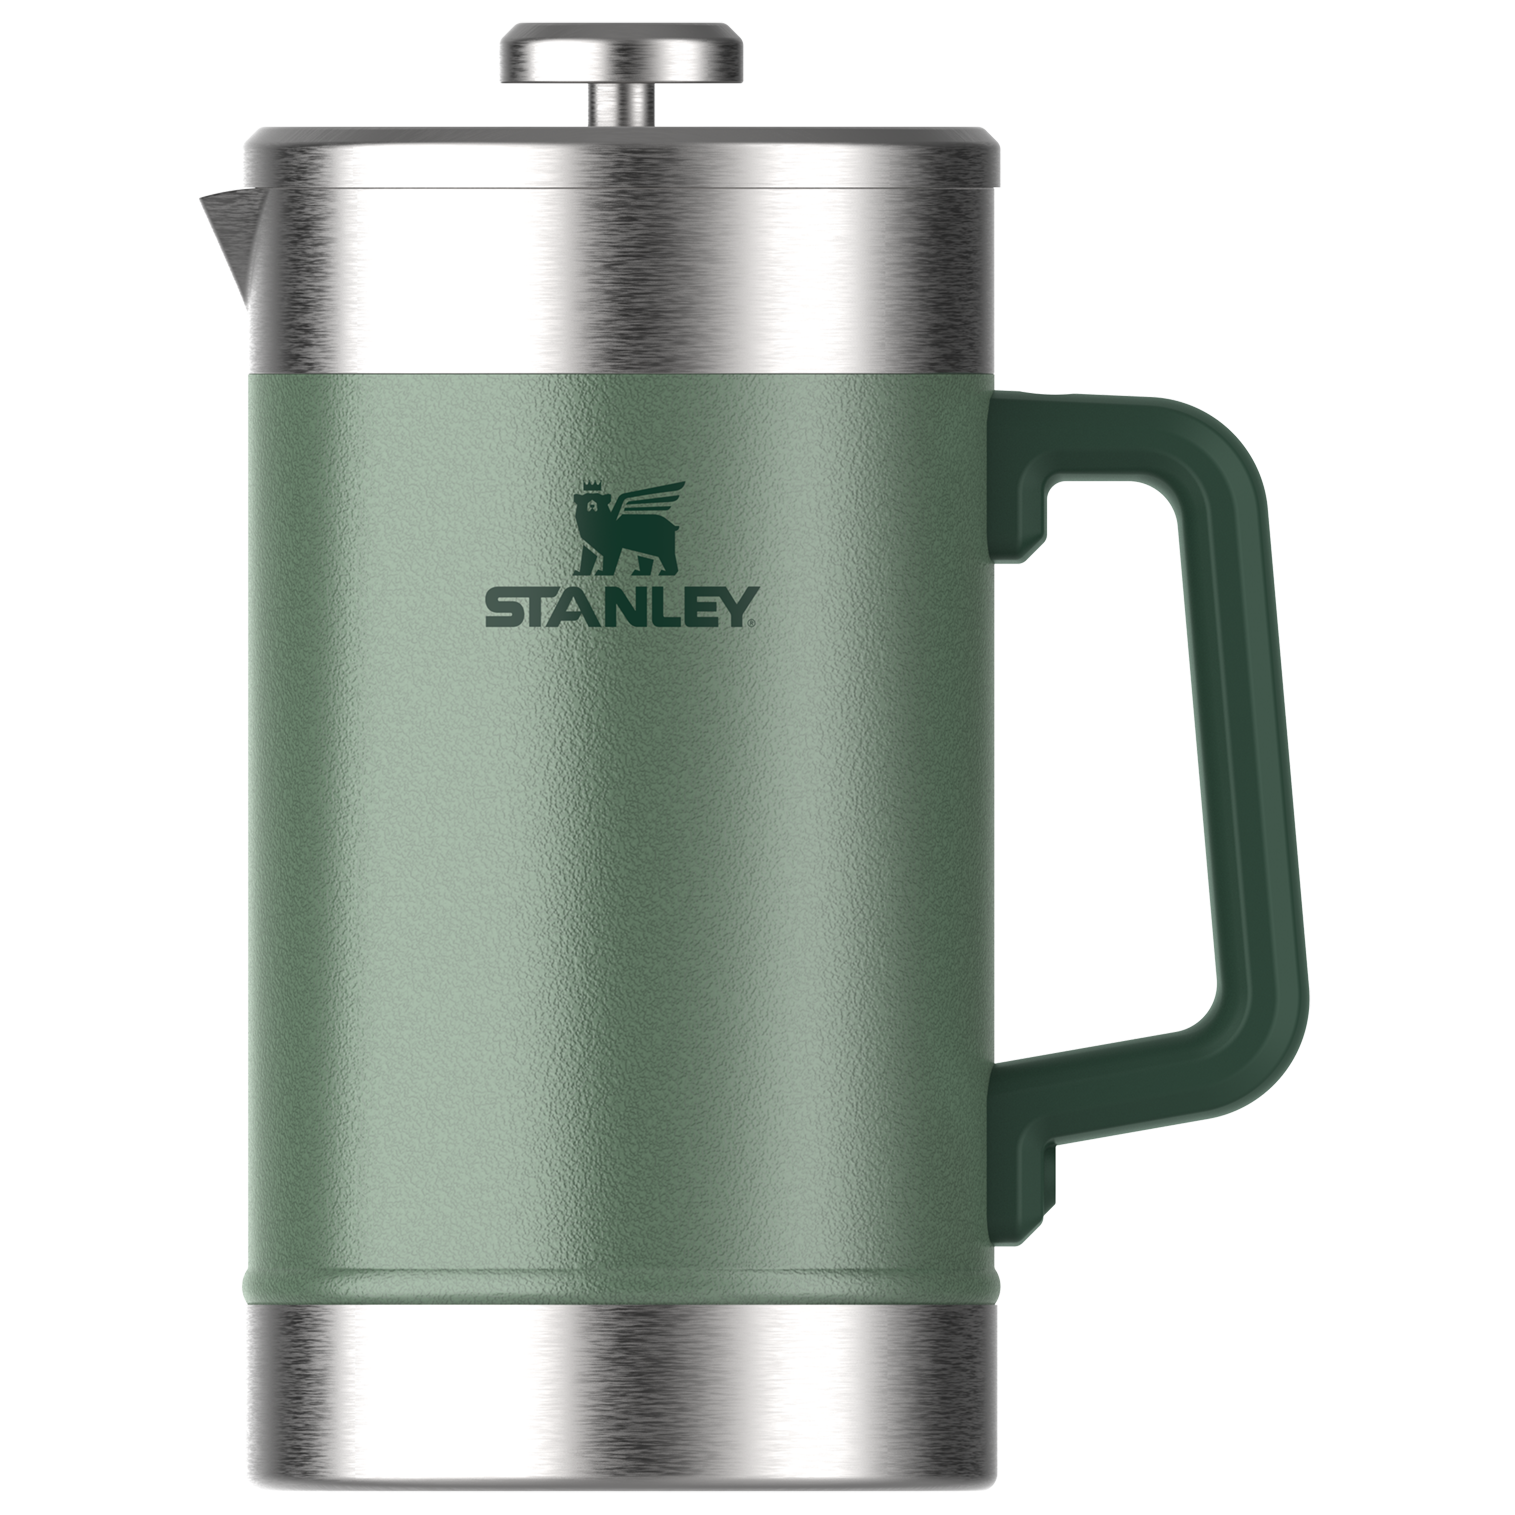 Classic Stay Hot French Press | 1.4L